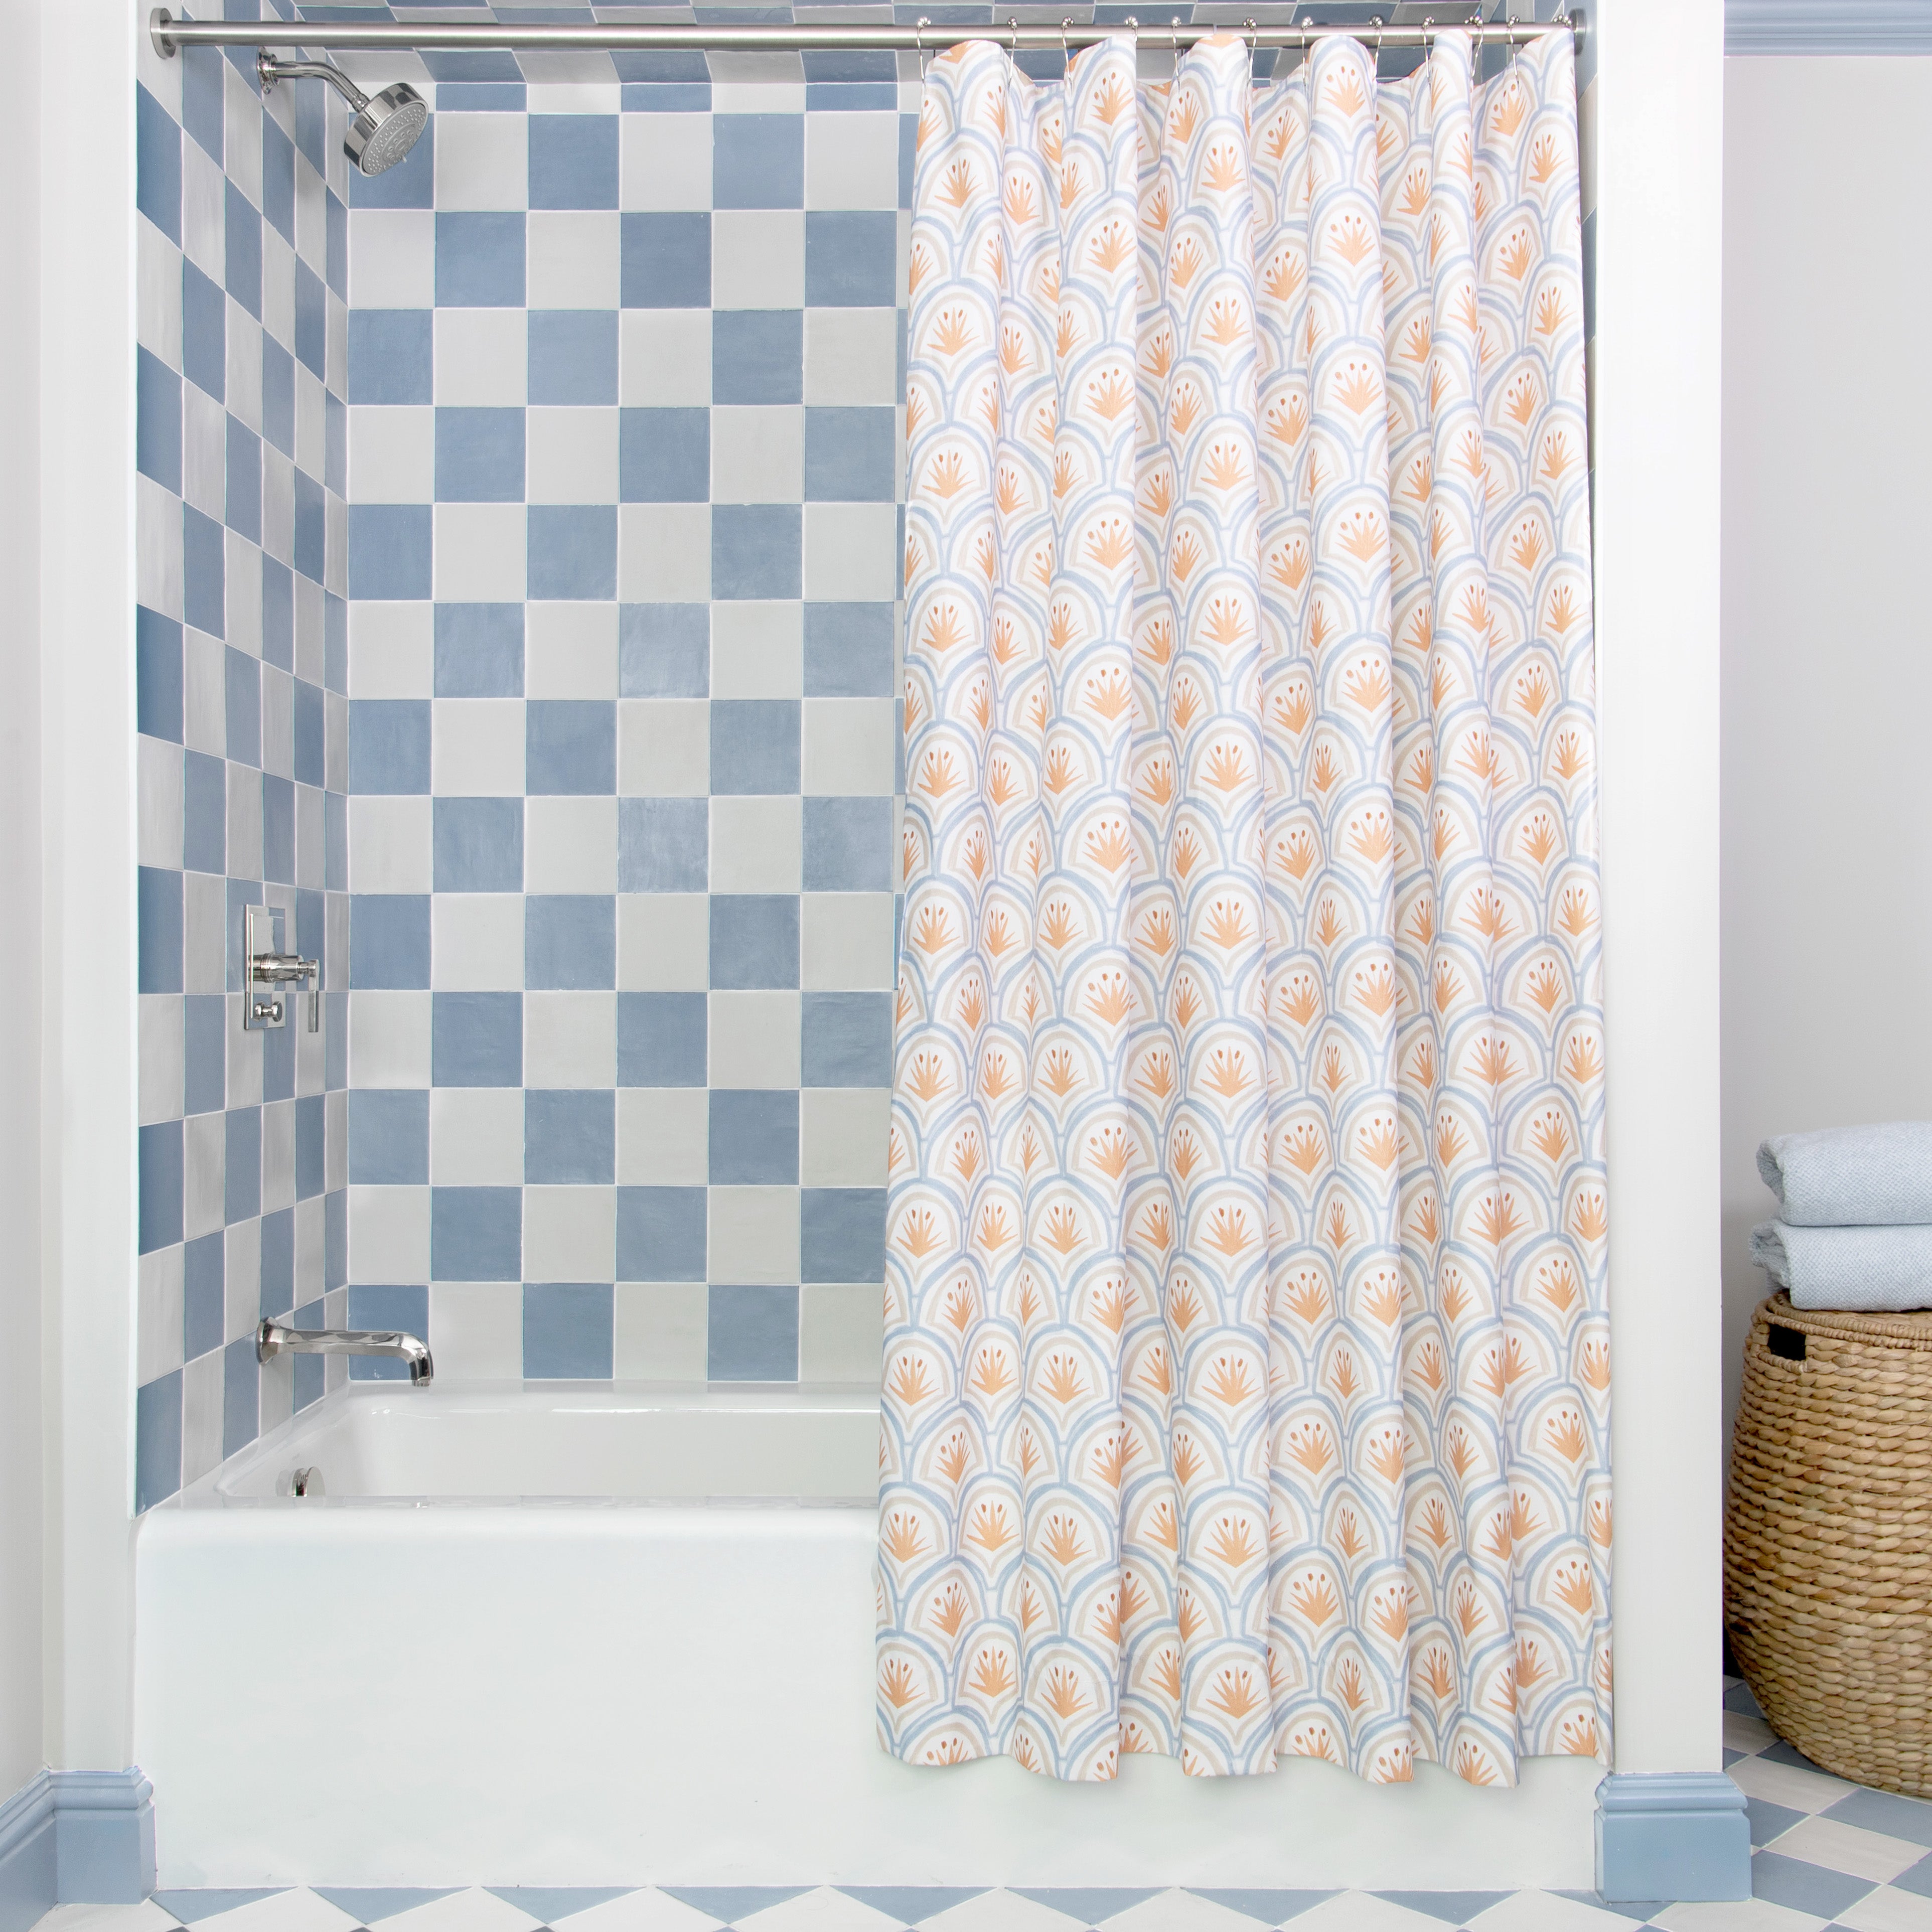 Art Deco Palm Pattern shower curtain hanging on rod in front of white tub in bathroom with blue and white tiles